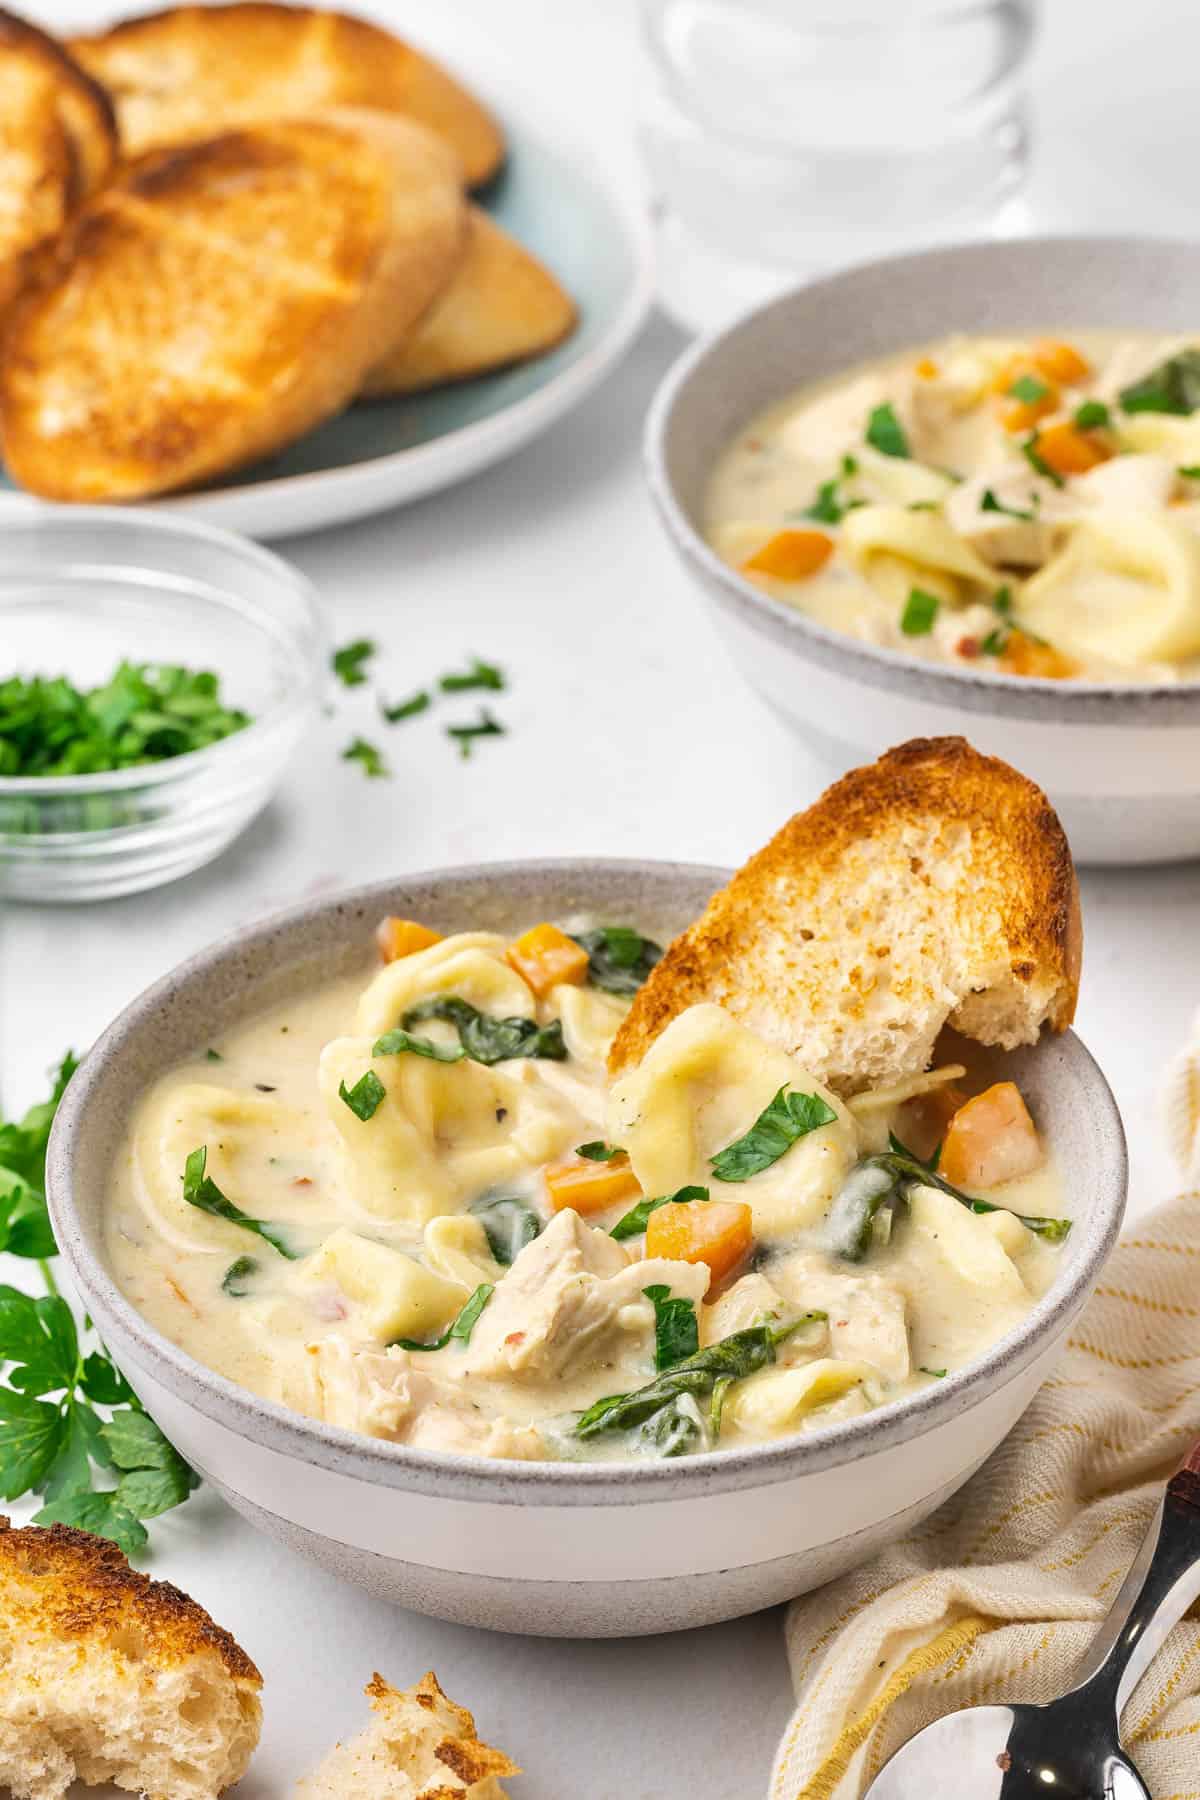 A bowl of creamy chicken tortellini soup with toasted bread in it.